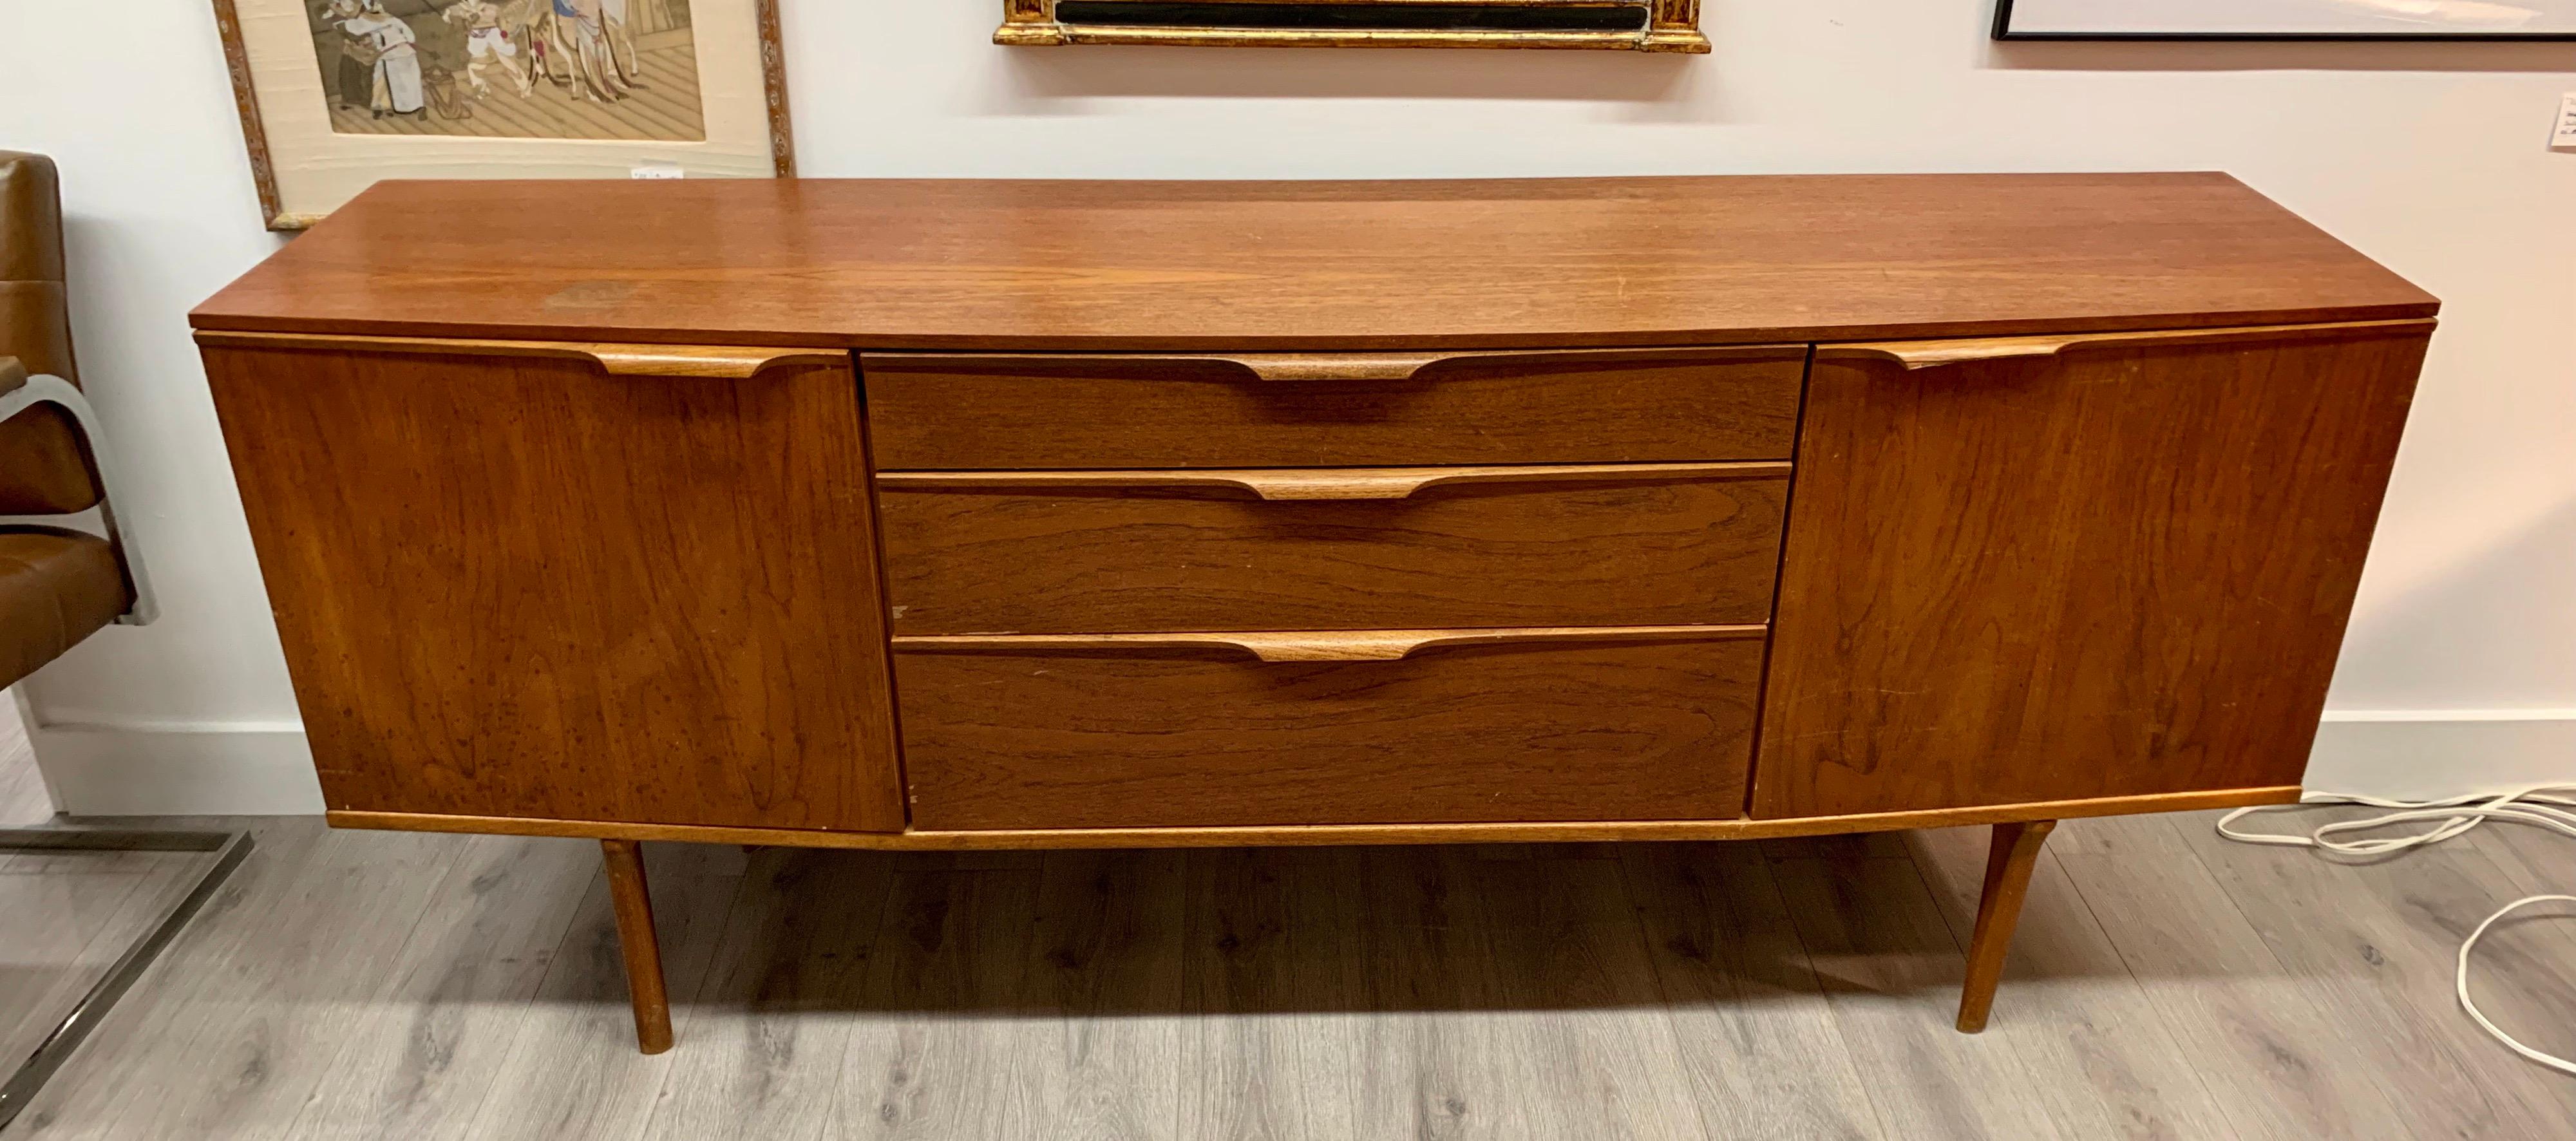 Unusual Danish modern bow front teak sideboard or server. The condition is fair and there is some
wear on the top as detailed in the pictures. There are three drawers in front as well as two compartments. Unsigned, circa 1960s.